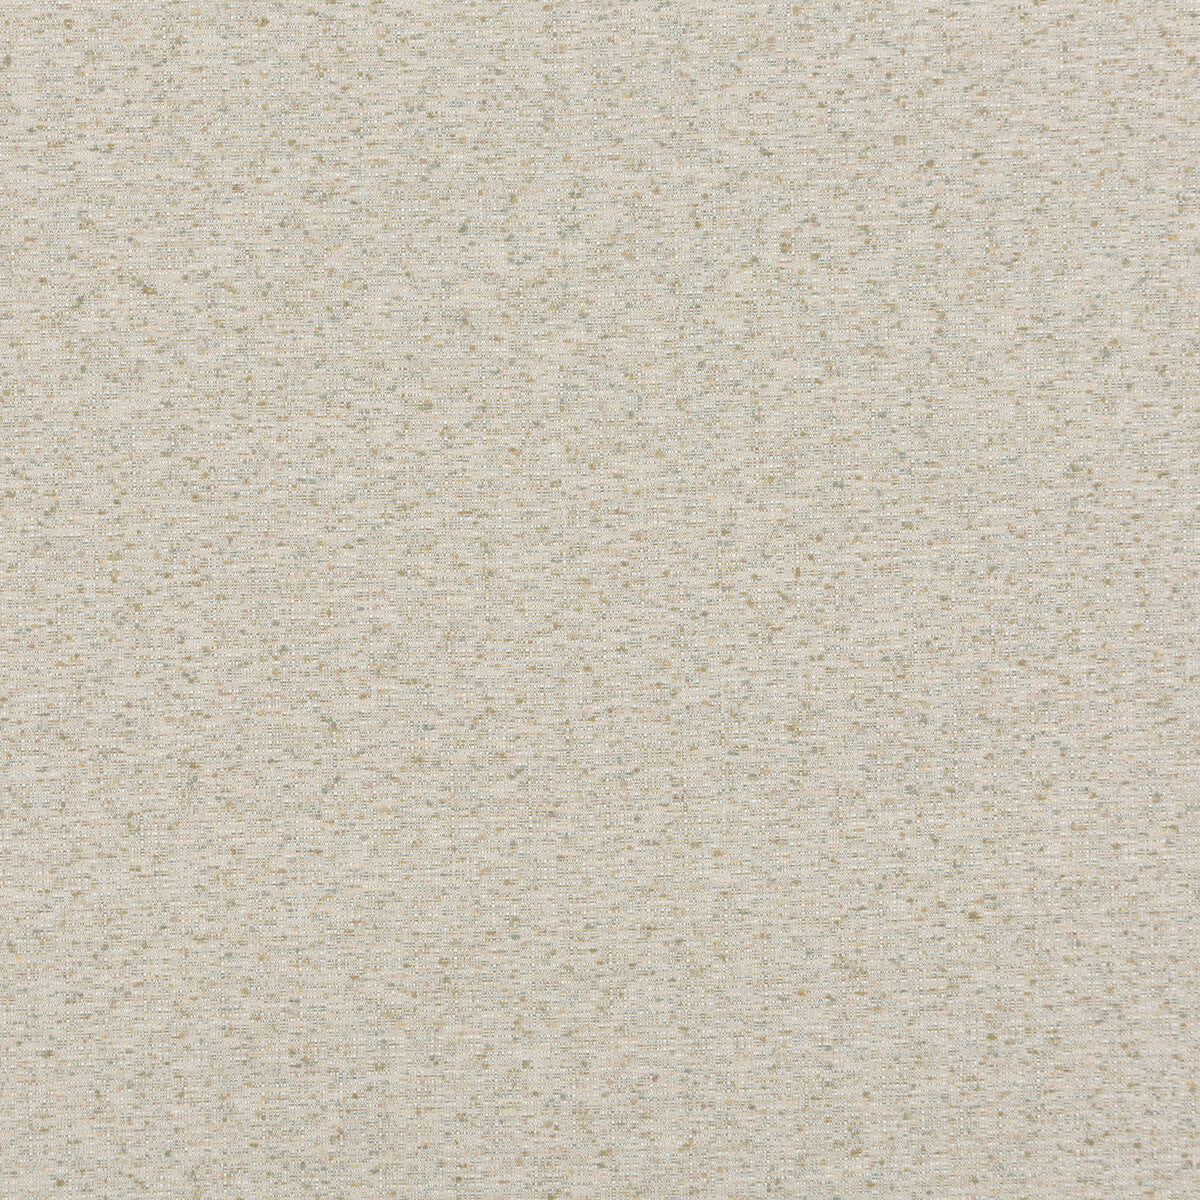 Drift fabric in marble color - pattern BF10678.106.0 - by G P &amp; J Baker in the Essential Colours collection